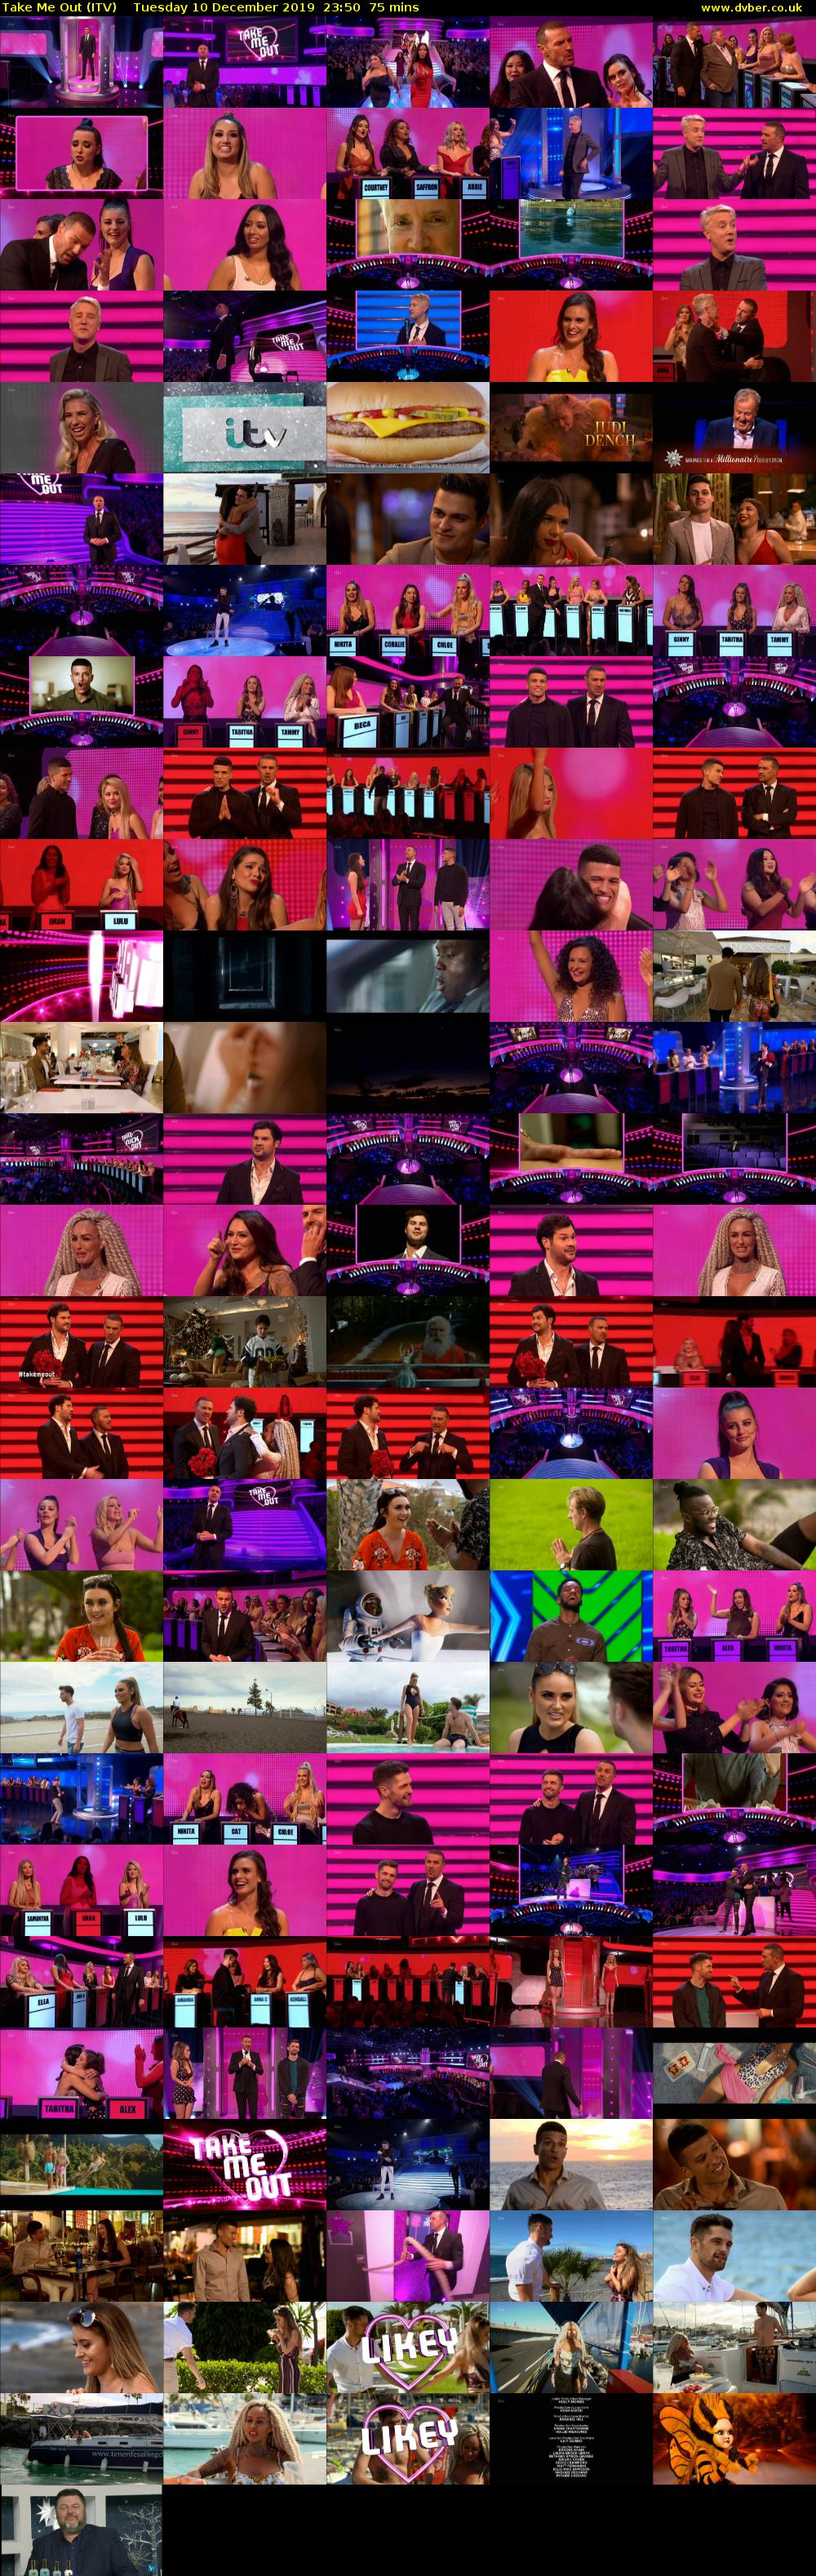 Take Me Out (ITV) Tuesday 10 December 2019 23:50 - 01:05